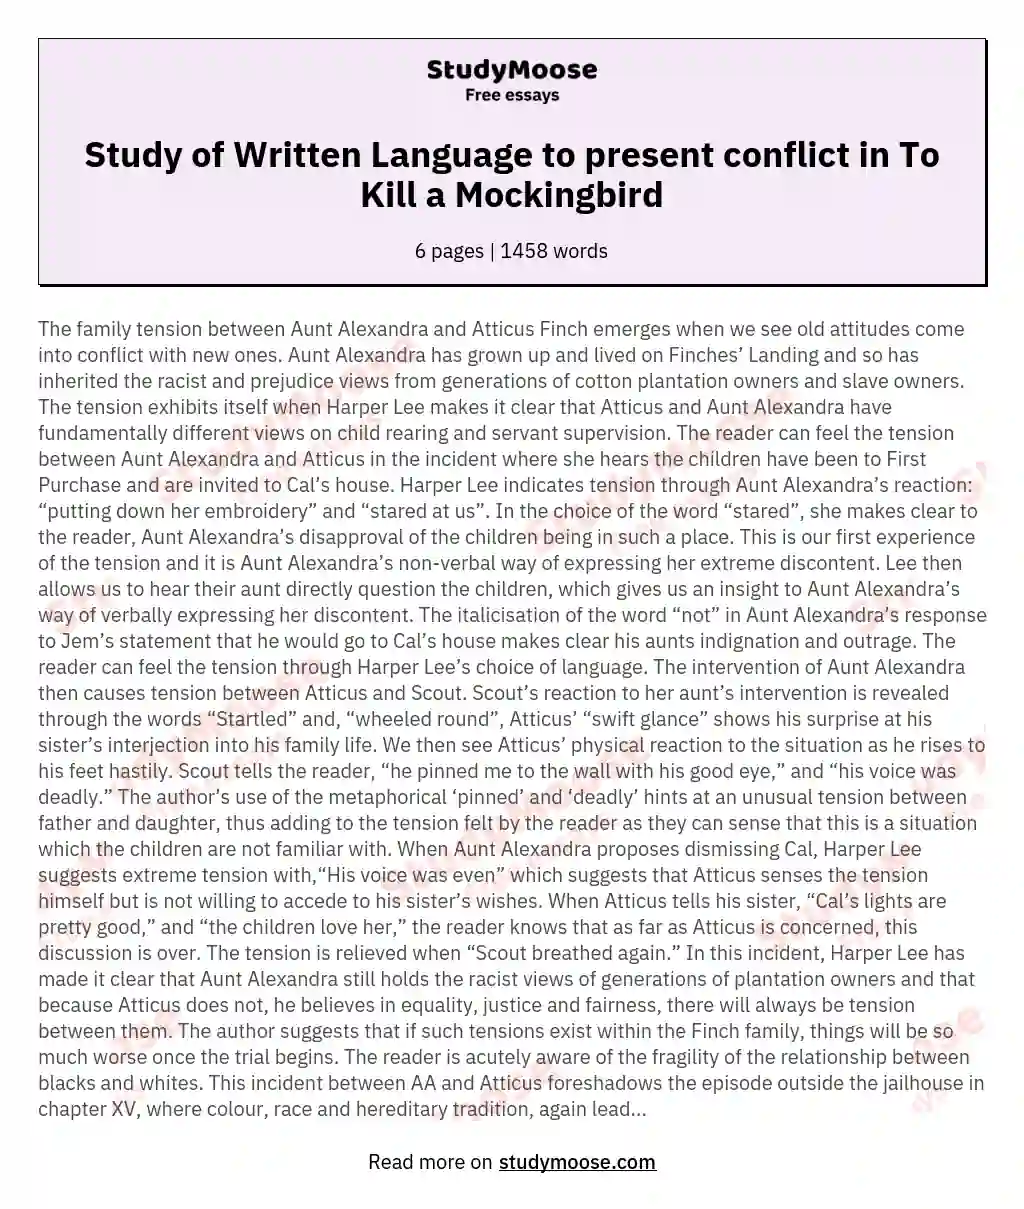 Study of Written Language to present conflict in To Kill a Mockingbird